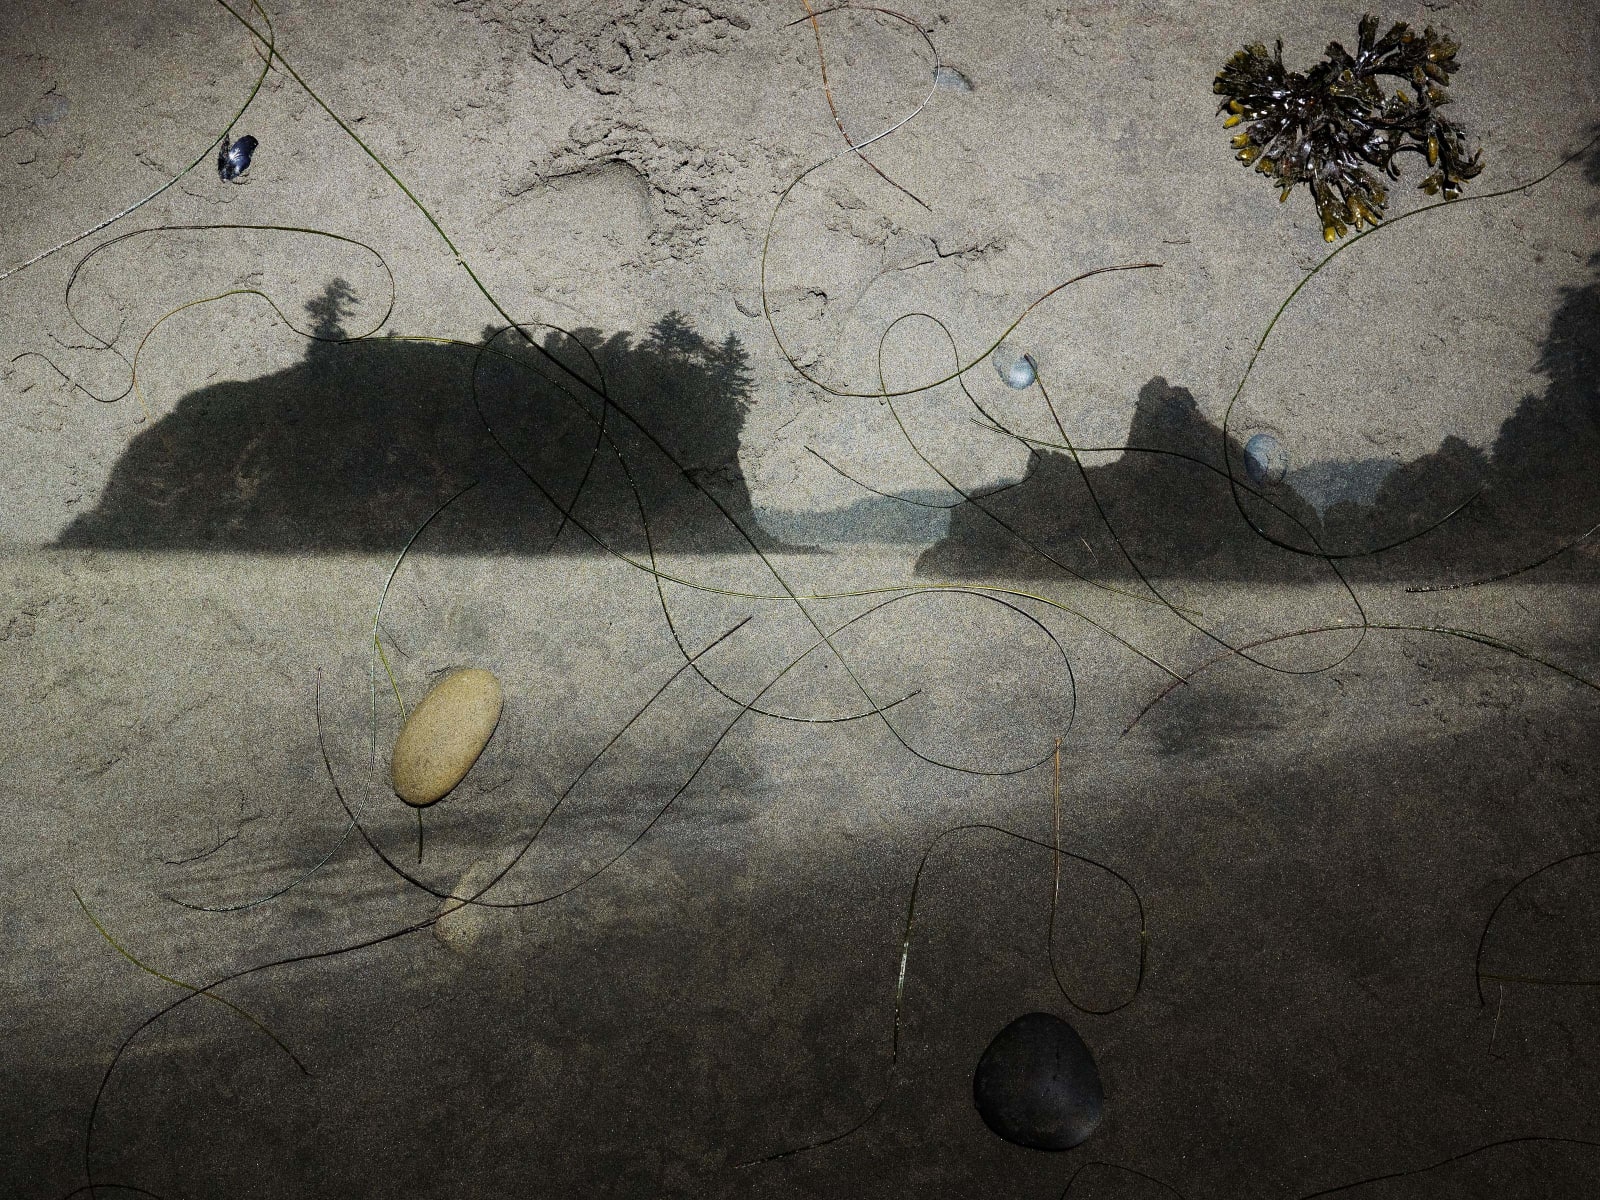 Abelardo Morell Tent Camera Image on Ground View of Sea Stacks Looking North Ruby Beach Olympic National Park Washington seaweed on beach sand and seastacks in water along coastline